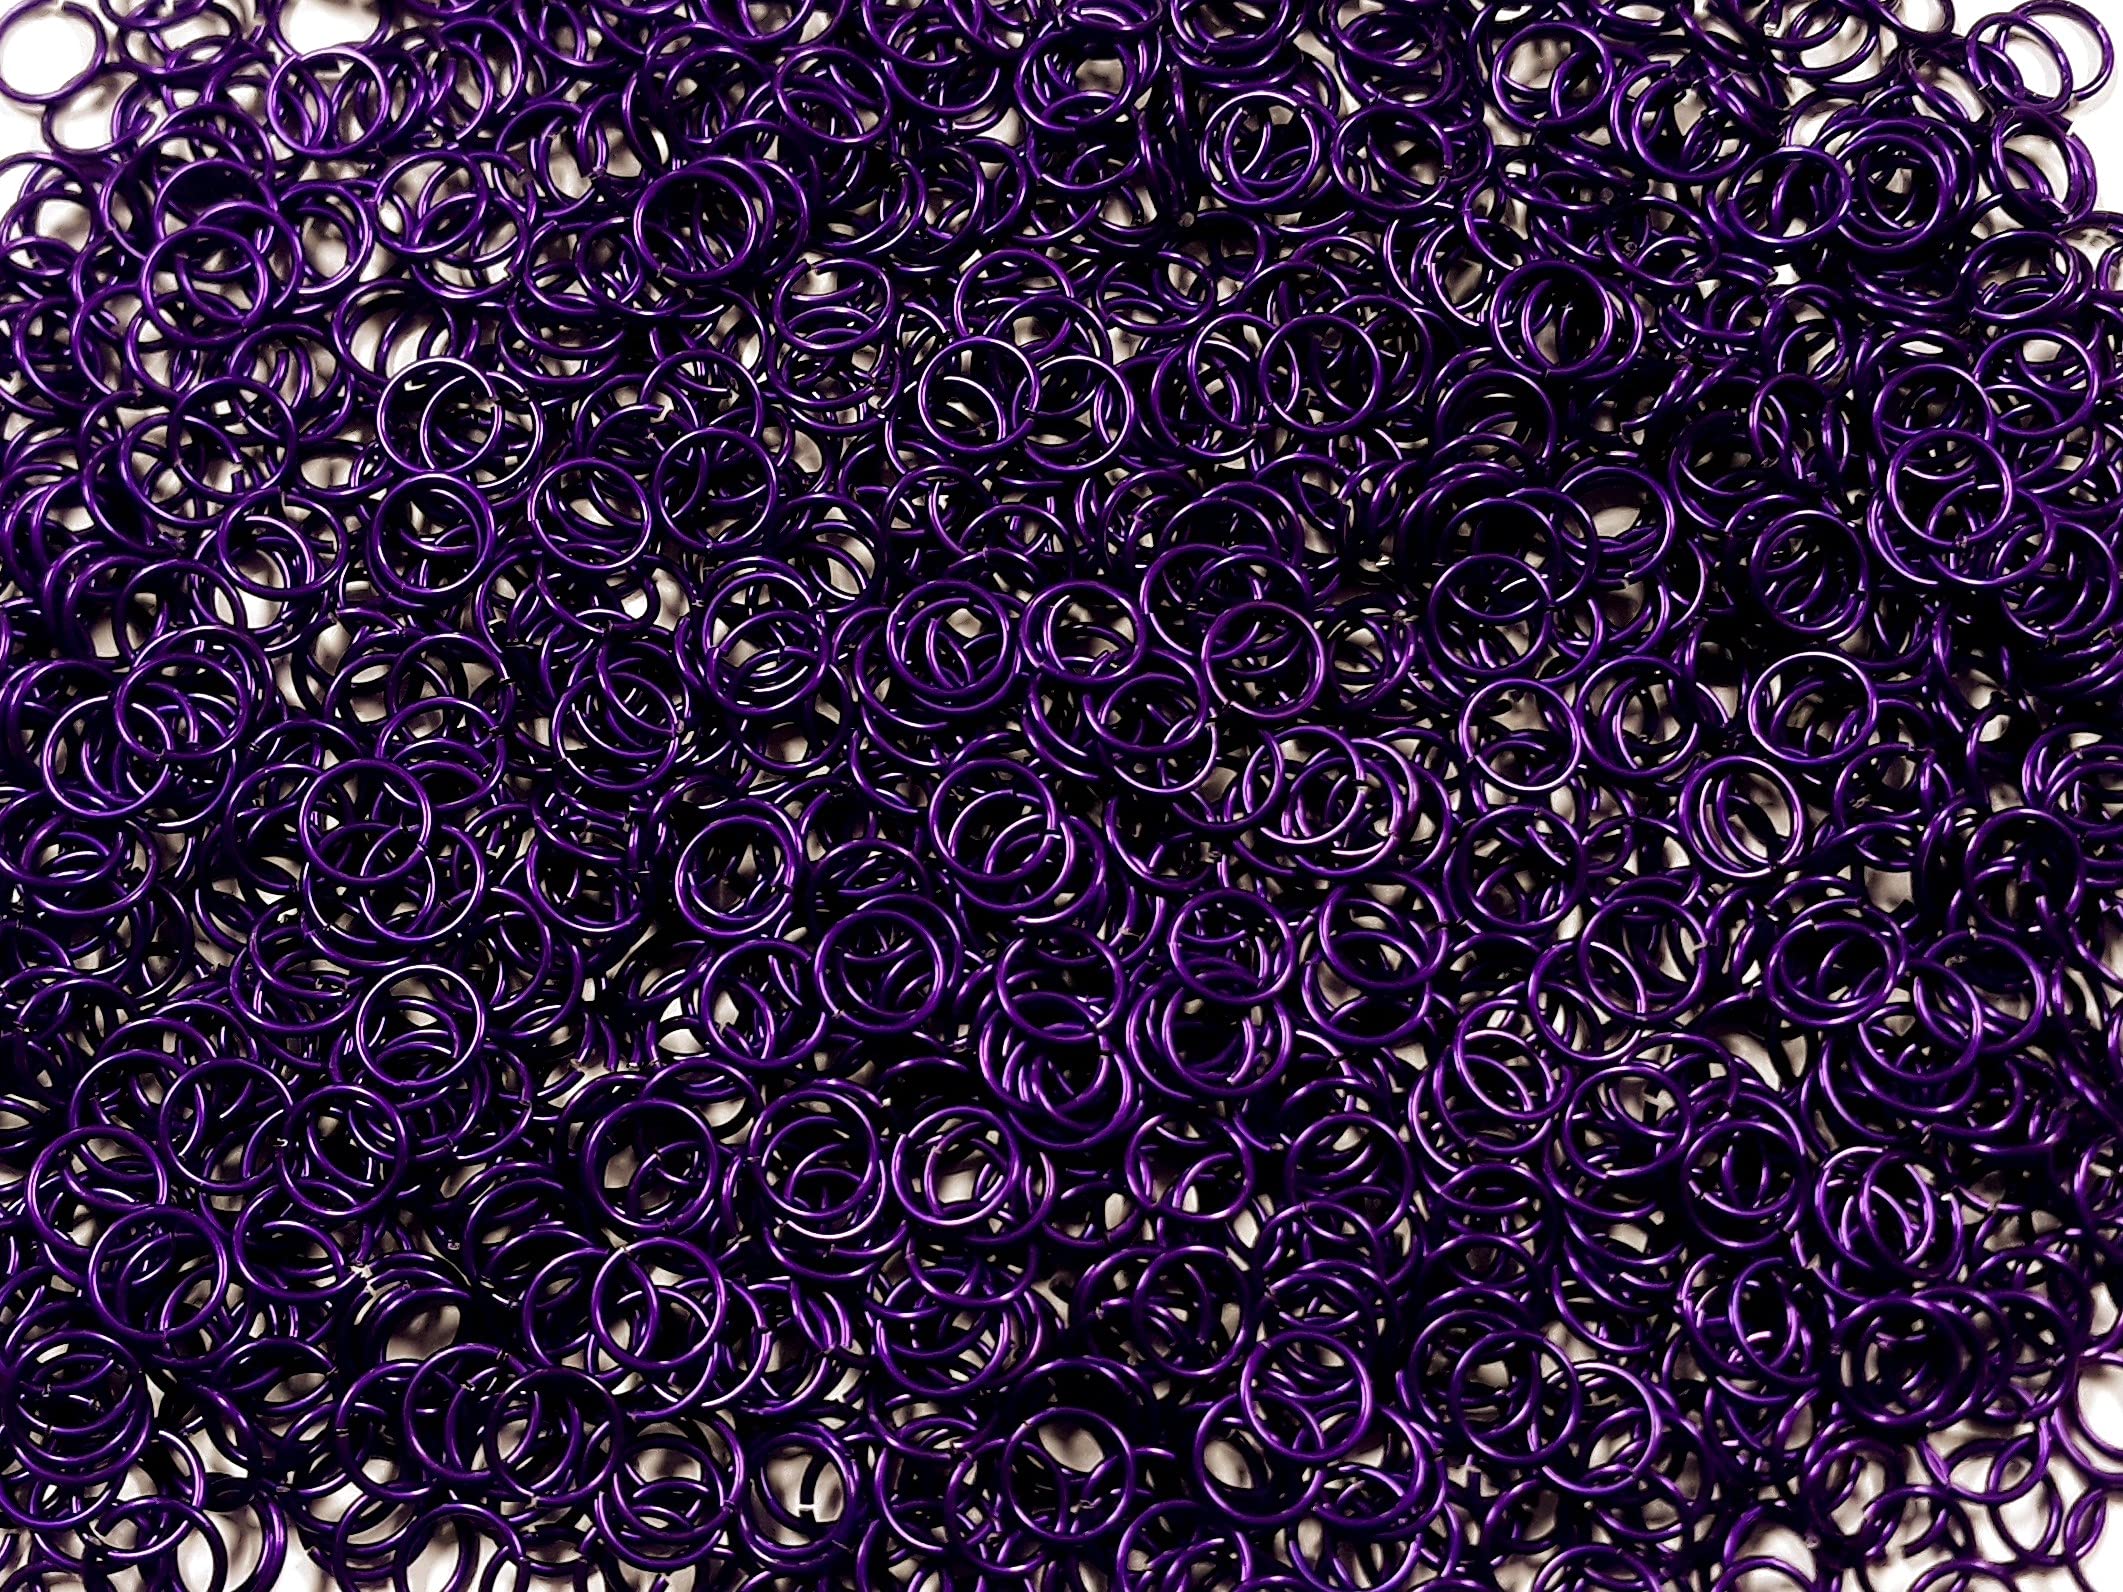 chainmail Joe 12 Pound Violet Anodized Aluminum Jump Rings 18g 516 ID  (2600+ Rings) 